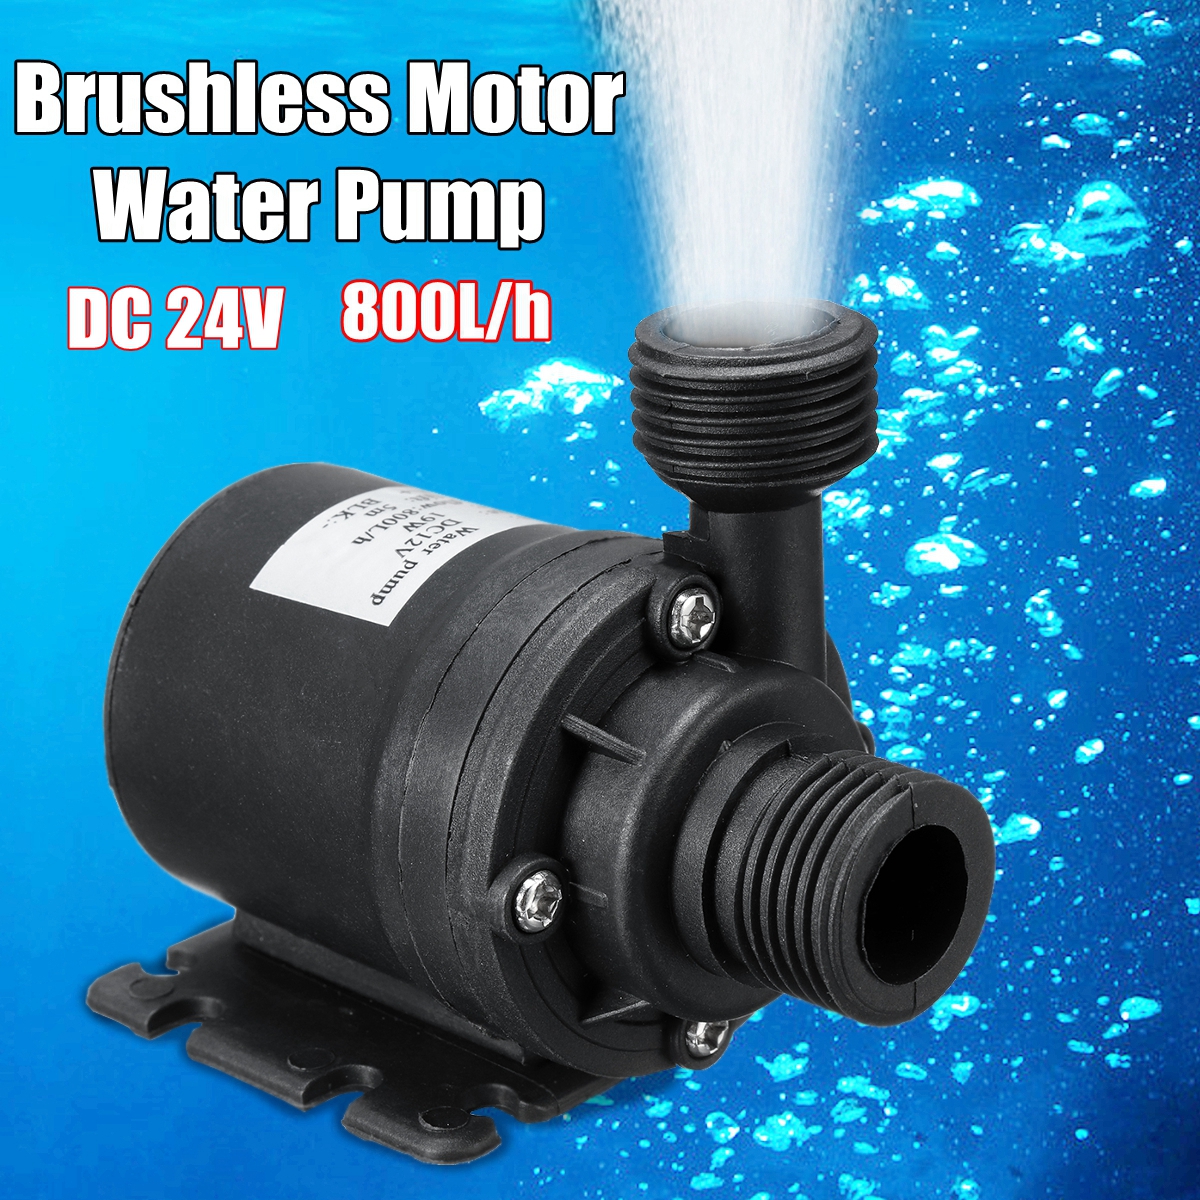 ZYW680-Mini-DC-24V-Water-Pump-Ultra-Quiet-55m-Lift-Brushless-Motor-Submersible-Water-Pump-1531436-2